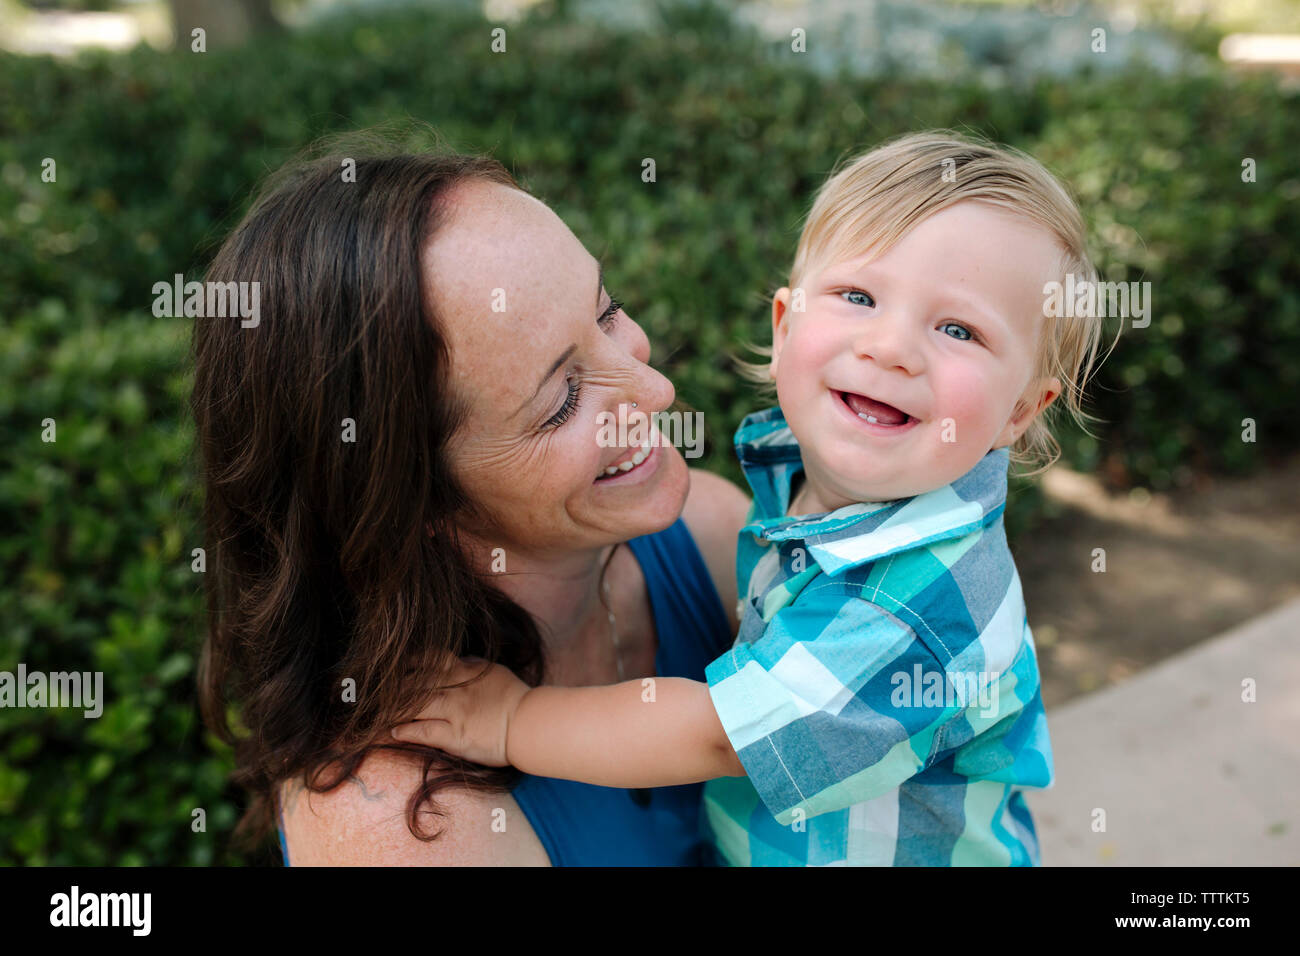 High angle portrait of cheerful baby boy avec happy woman at park Banque D'Images